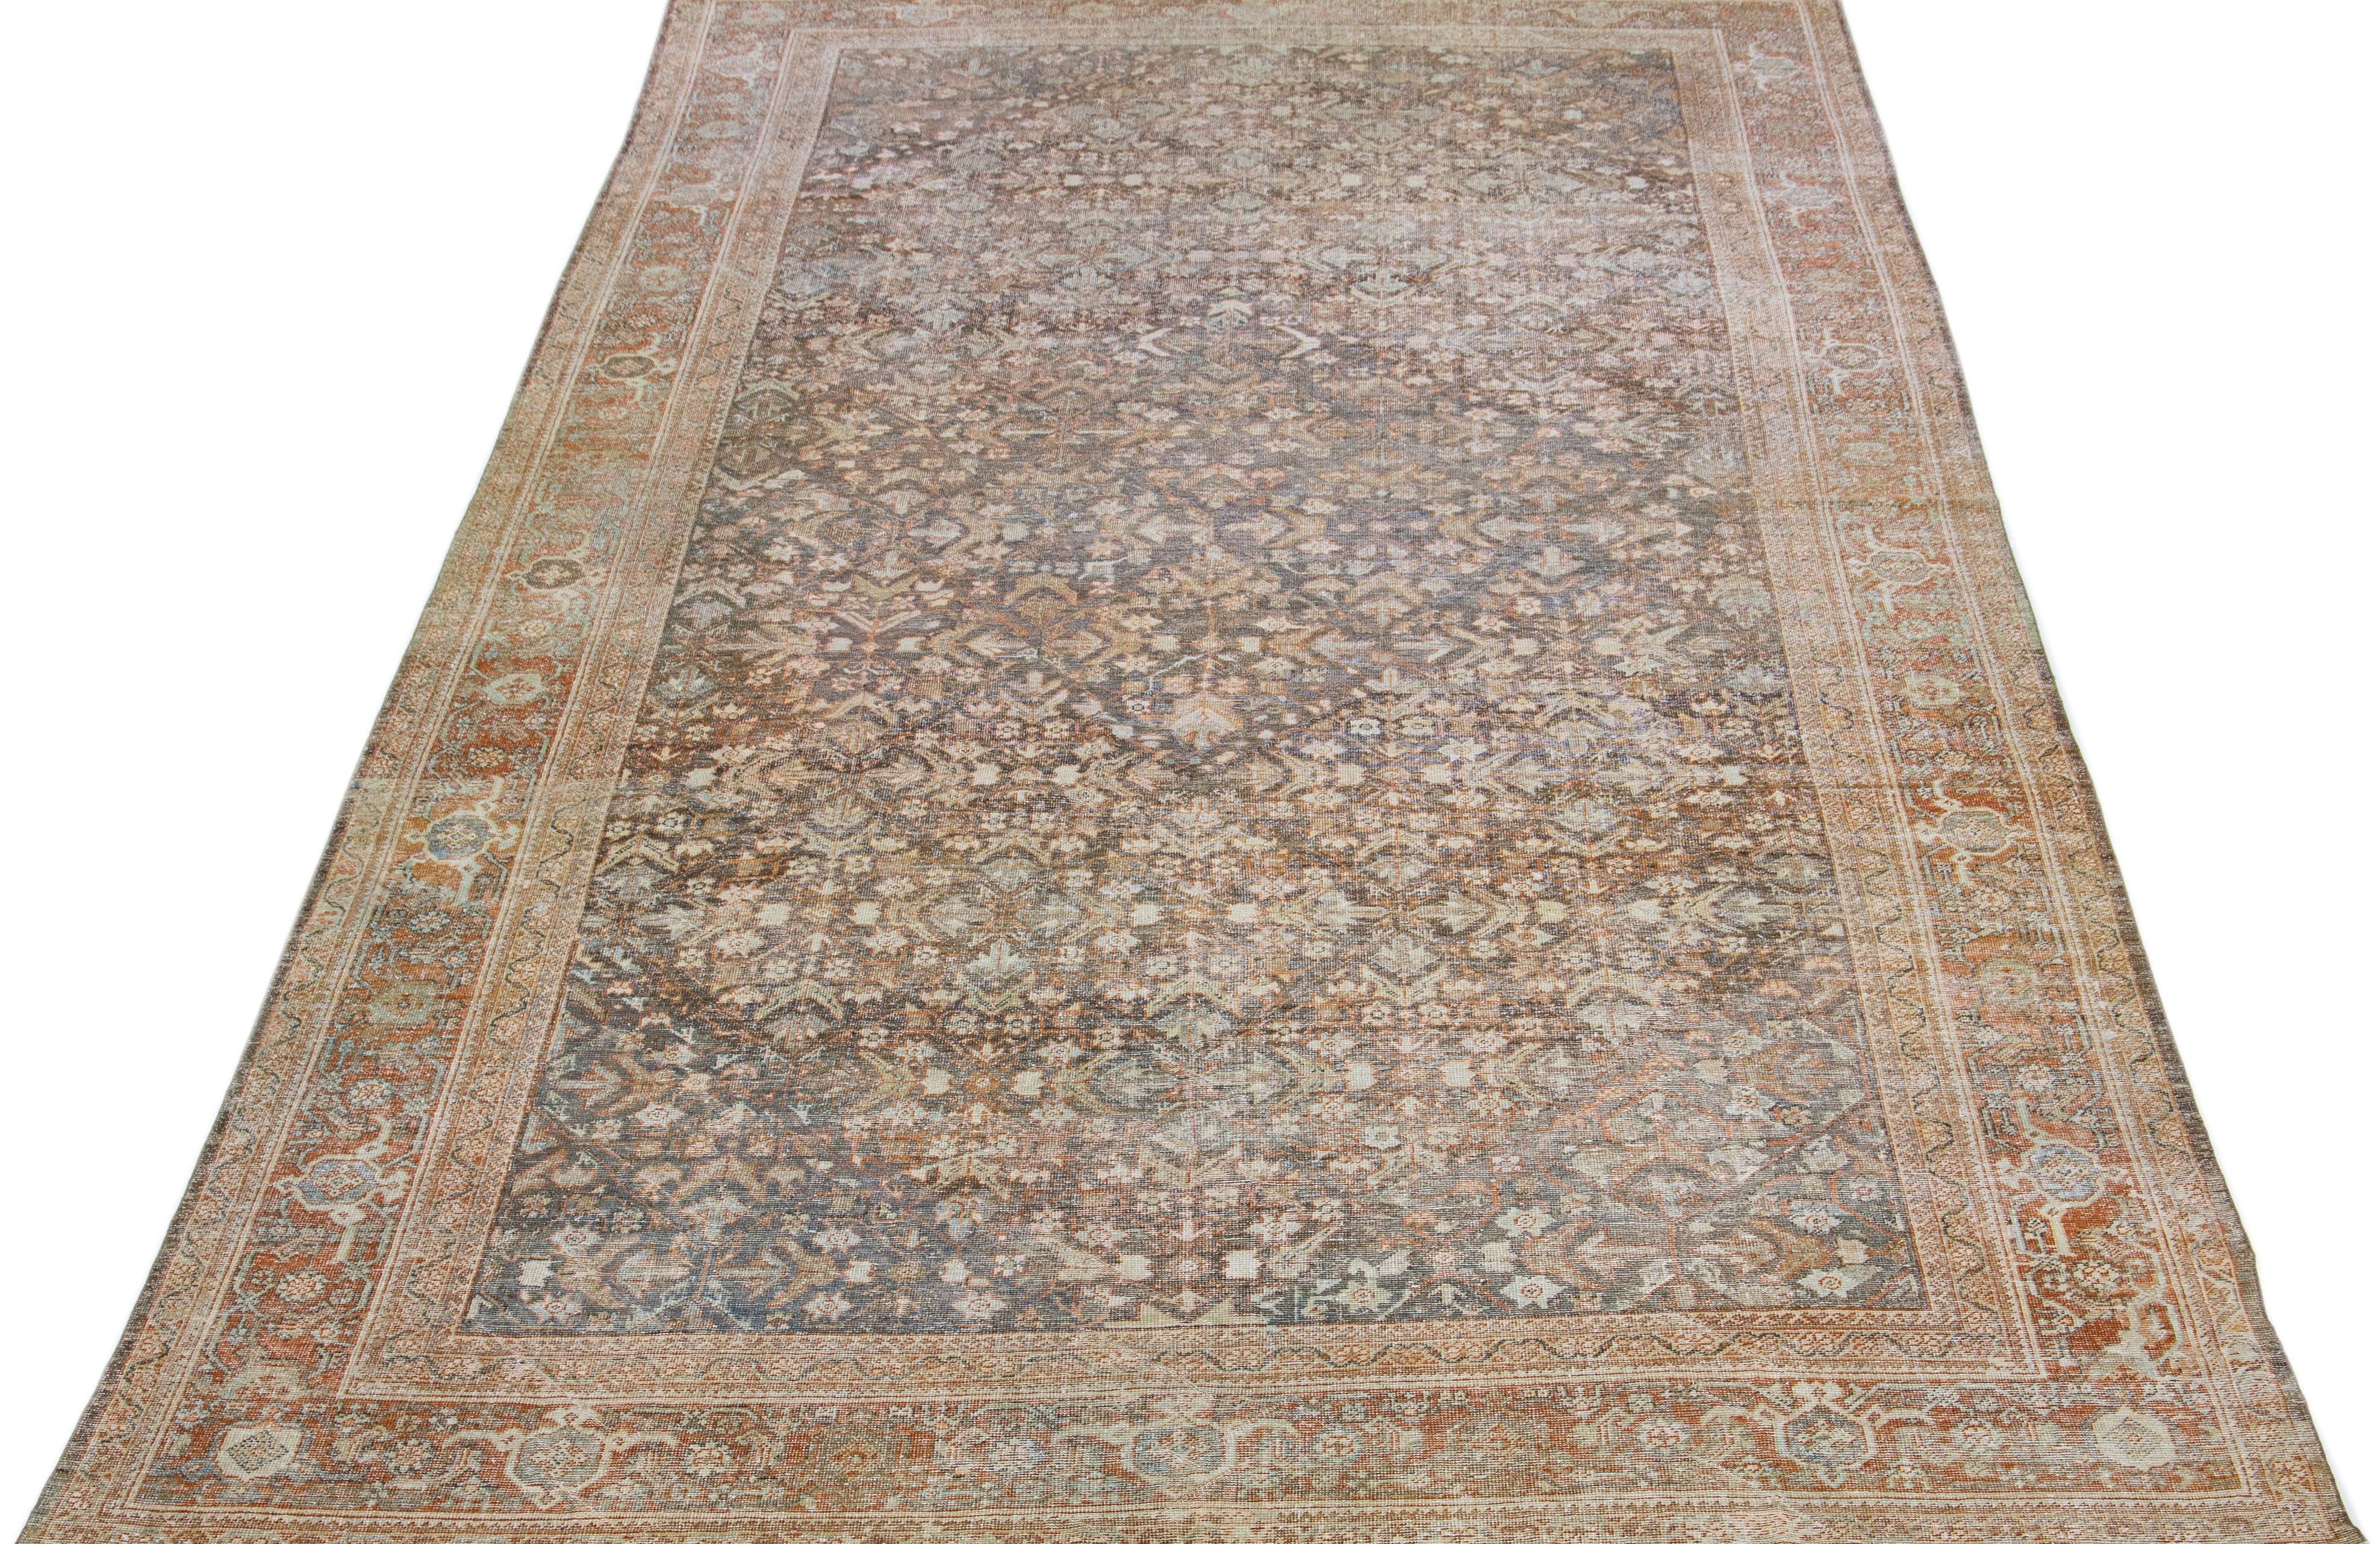 Beautiful antique Mahal hand-knotted wool rug with a gray color field. This Persian rug has orange-rust and brown accents in a gorgeous traditional floral motif.

This rug measures: 10'1